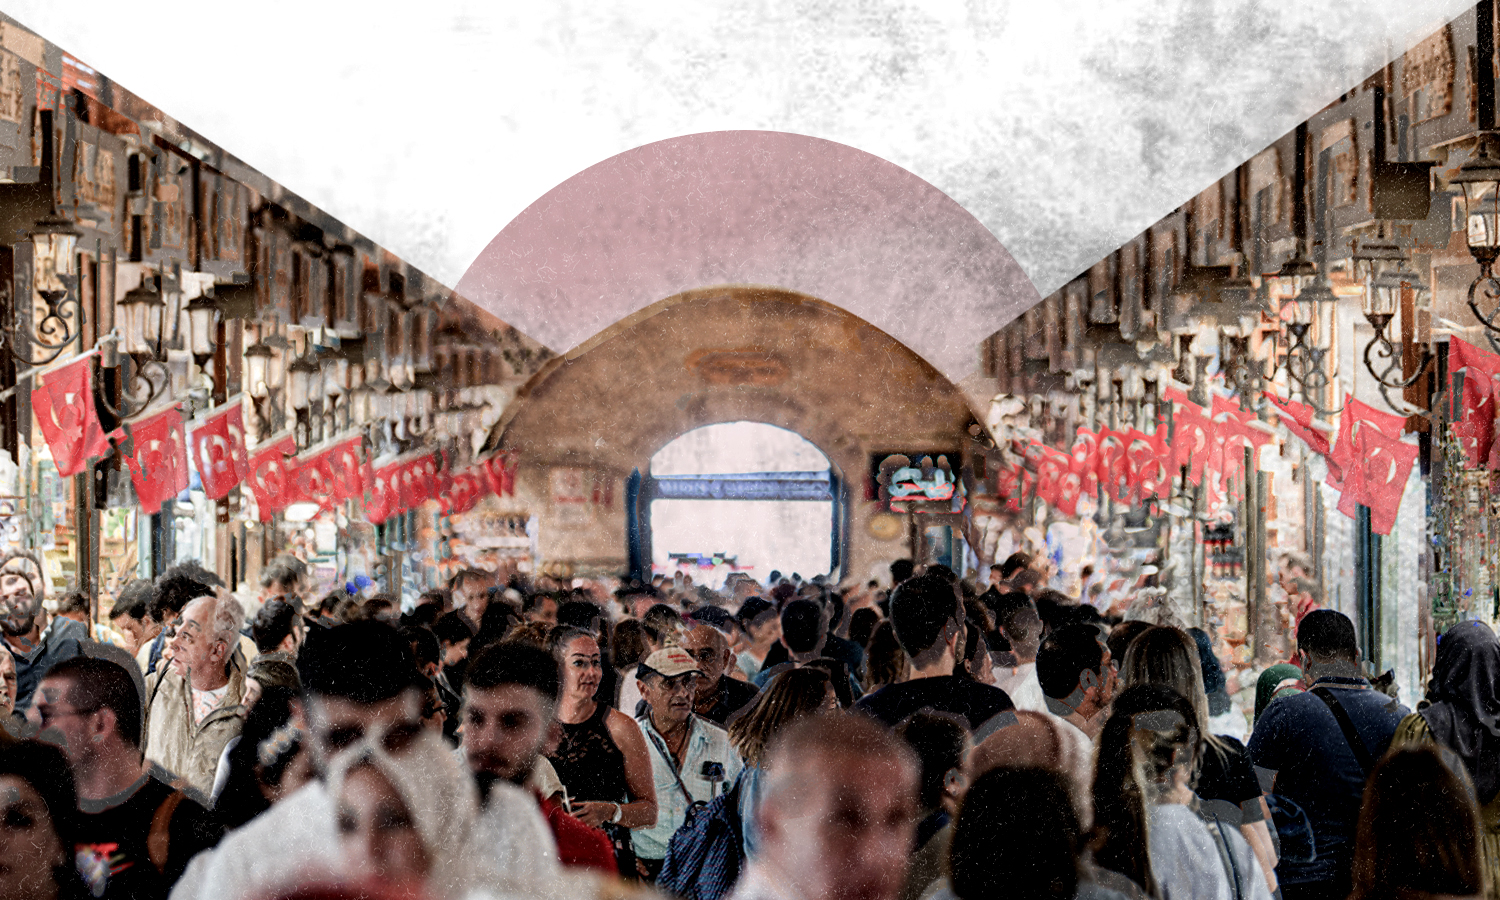 Tourists from various nationalities in the Egyptian market in Istanbul (Edited by Enab Baladi)